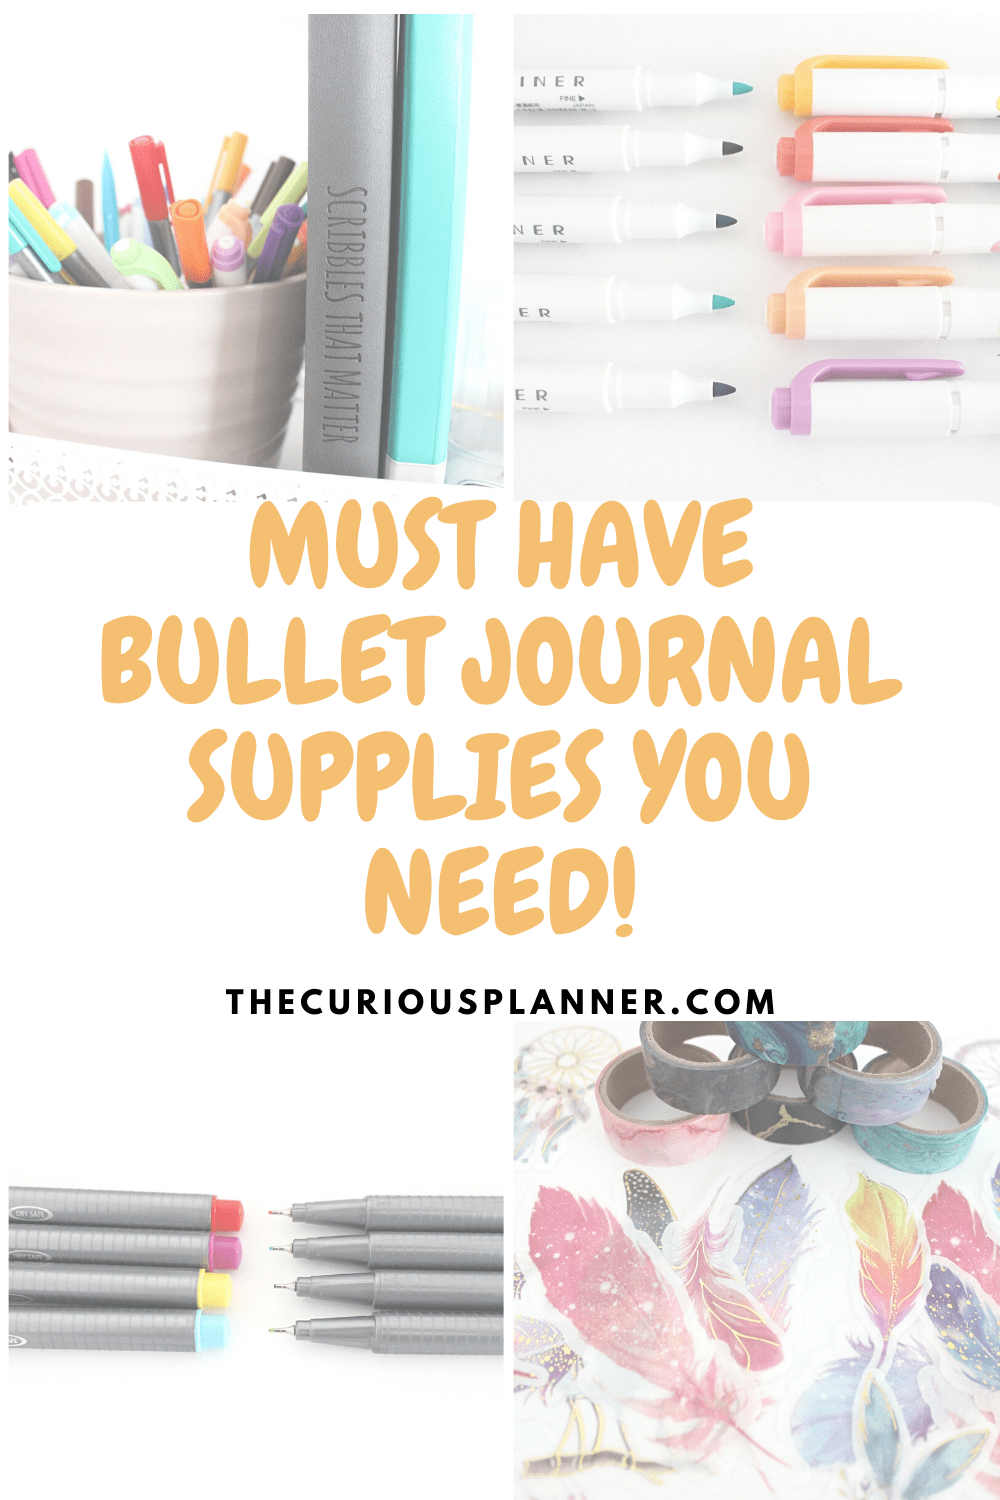 https://thecuriousplanner.com/wp-content/uploads/2020/07/MUST_HAVE_BULLET_JOURNAL_SUPPLIES_YOU_NEED_TO_HAVE_AND_KNOW_ABOUT_CHEAP.png